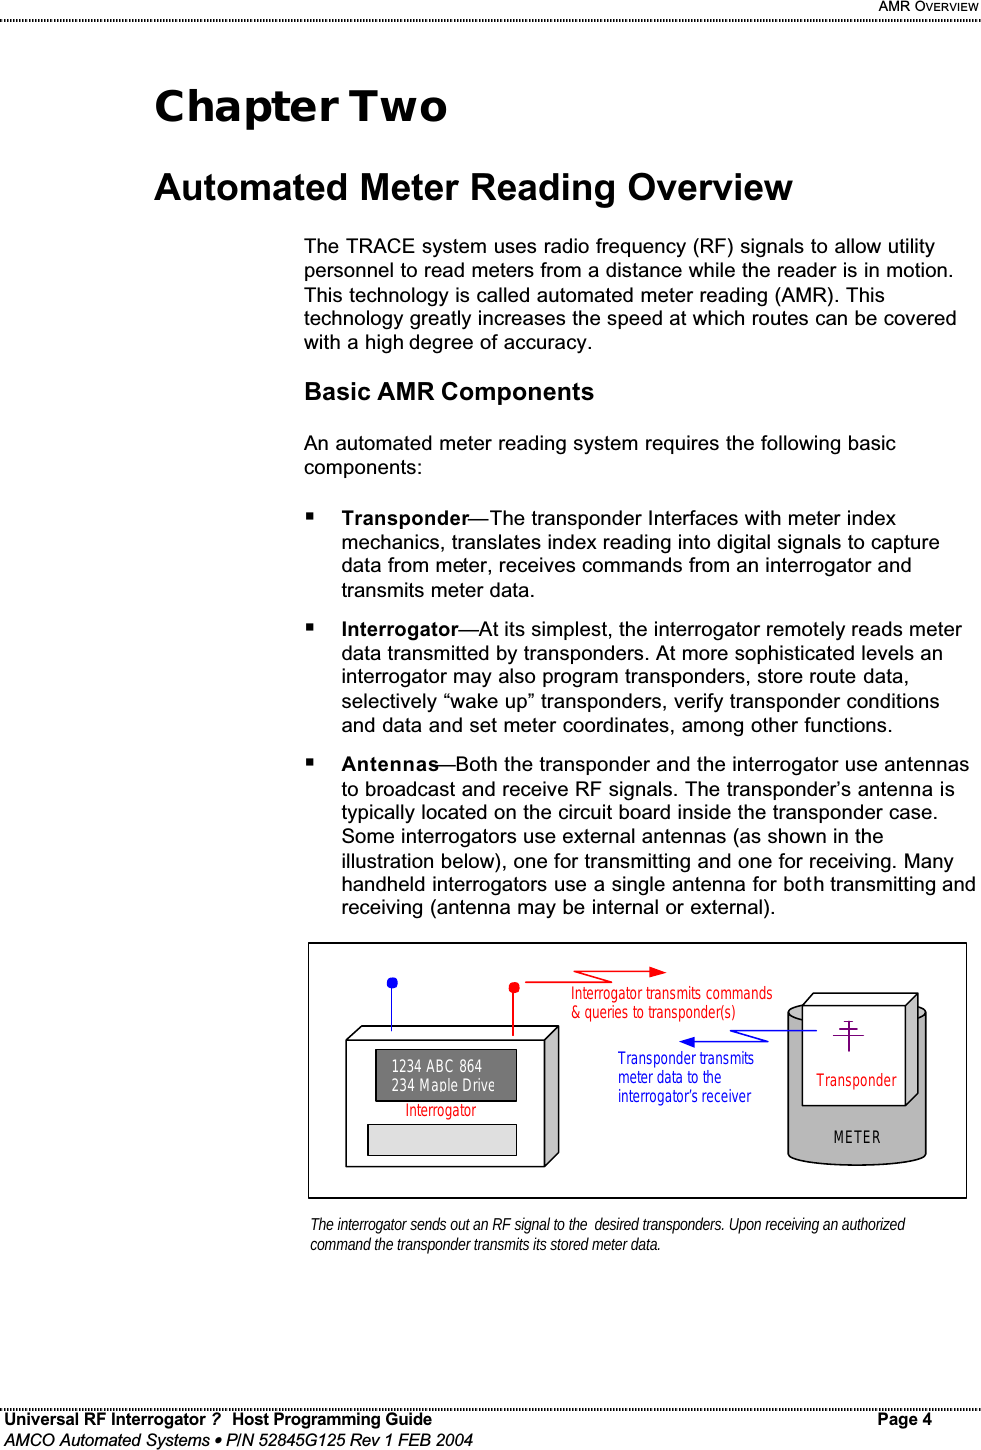     AMR OVERVIEW Universal RF Interrogator ?  Host Programming Guide Page 4  AMCO Automated Systems • P/N 52845G125 Rev 1 FEB 2004   Chapter Two  Automated Meter Reading Overview  The TRACE system uses radio frequency (RF) signals to allow utility personnel to read meters from a distance while the reader is in motion. This technology is called automated meter reading (AMR). This technology greatly increases the speed at which routes can be covered with a high degree of accuracy.  Basic AMR Components  An automated meter reading system requires the following basic components:  ! Transponder—The transponder Interfaces with meter index mechanics, translates index reading into digital signals to capture data from meter, receives commands from an interrogator and transmits meter data. ! Interrogator—At its simplest, the interrogator remotely reads meter data transmitted by transponders. At more sophisticated levels an interrogator may also program transponders, store route data, selectively “wake up” transponders, verify transponder conditions and data and set meter coordinates, among other functions. ! Antennas—Both the transponder and the interrogator use antennas to broadcast and receive RF signals. The transponder’s antenna is typically located on the circuit board inside the transponder case. Some interrogators use external antennas (as shown in the illustration below), one for transmitting and one for receiving. Many handheld interrogators use a single antenna for both transmitting and receiving (antenna may be internal or external).                Transponder METERThe interrogator sends out an RF signal to the desired transponders. Upon receiving an authorized command the transponder transmits its stored meter data.  1234 ABC 864 234 Maple DriveInterrogatorInterrogator transmits commands &amp; queries to transponder(s)  Transponder transmits meter data to the interrogator’s receiver  